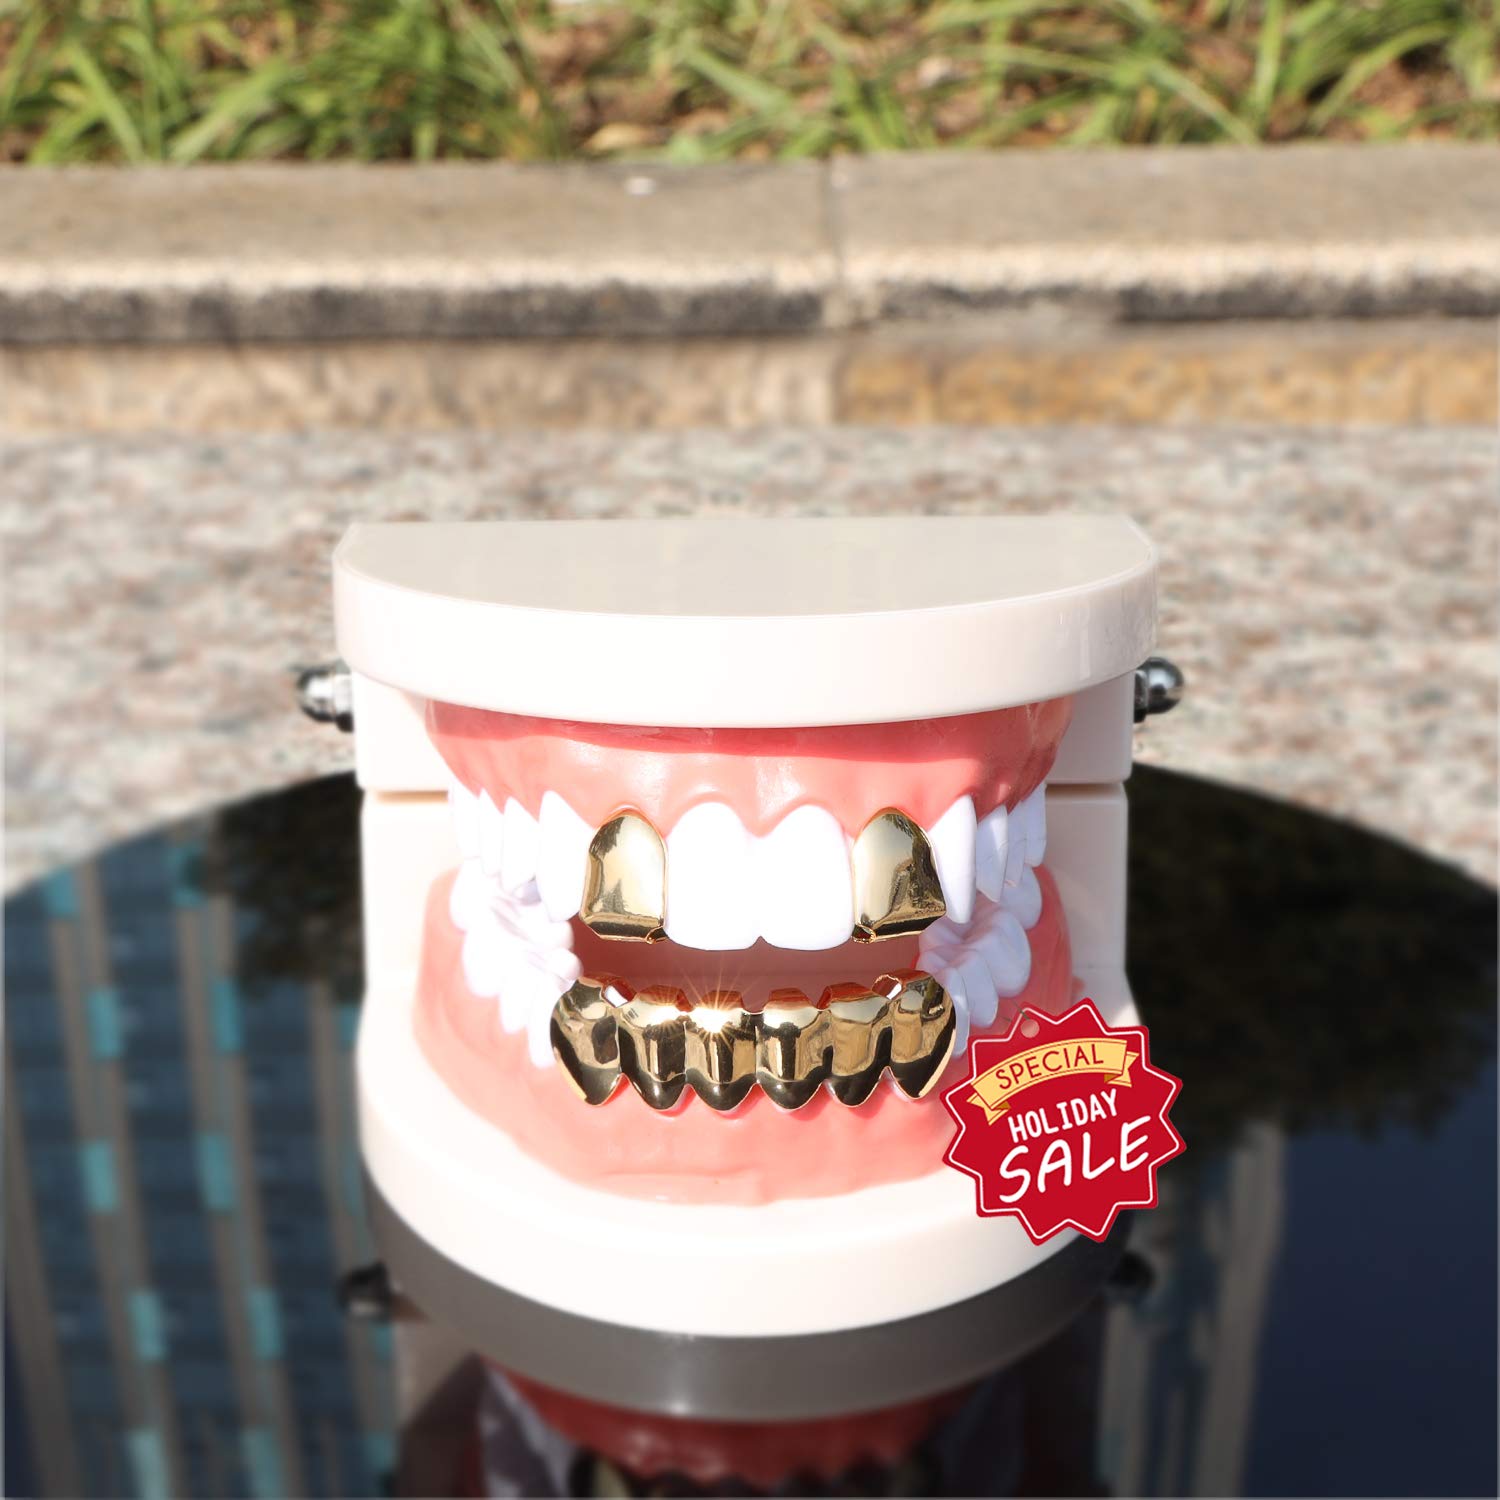 Gold Grillz Mouth Teeth 24K Plated Gold Custom Fit Top & Bottom Set Caps Grillz For Women Gift + Extra Molding Bars + Microfiber Cloth